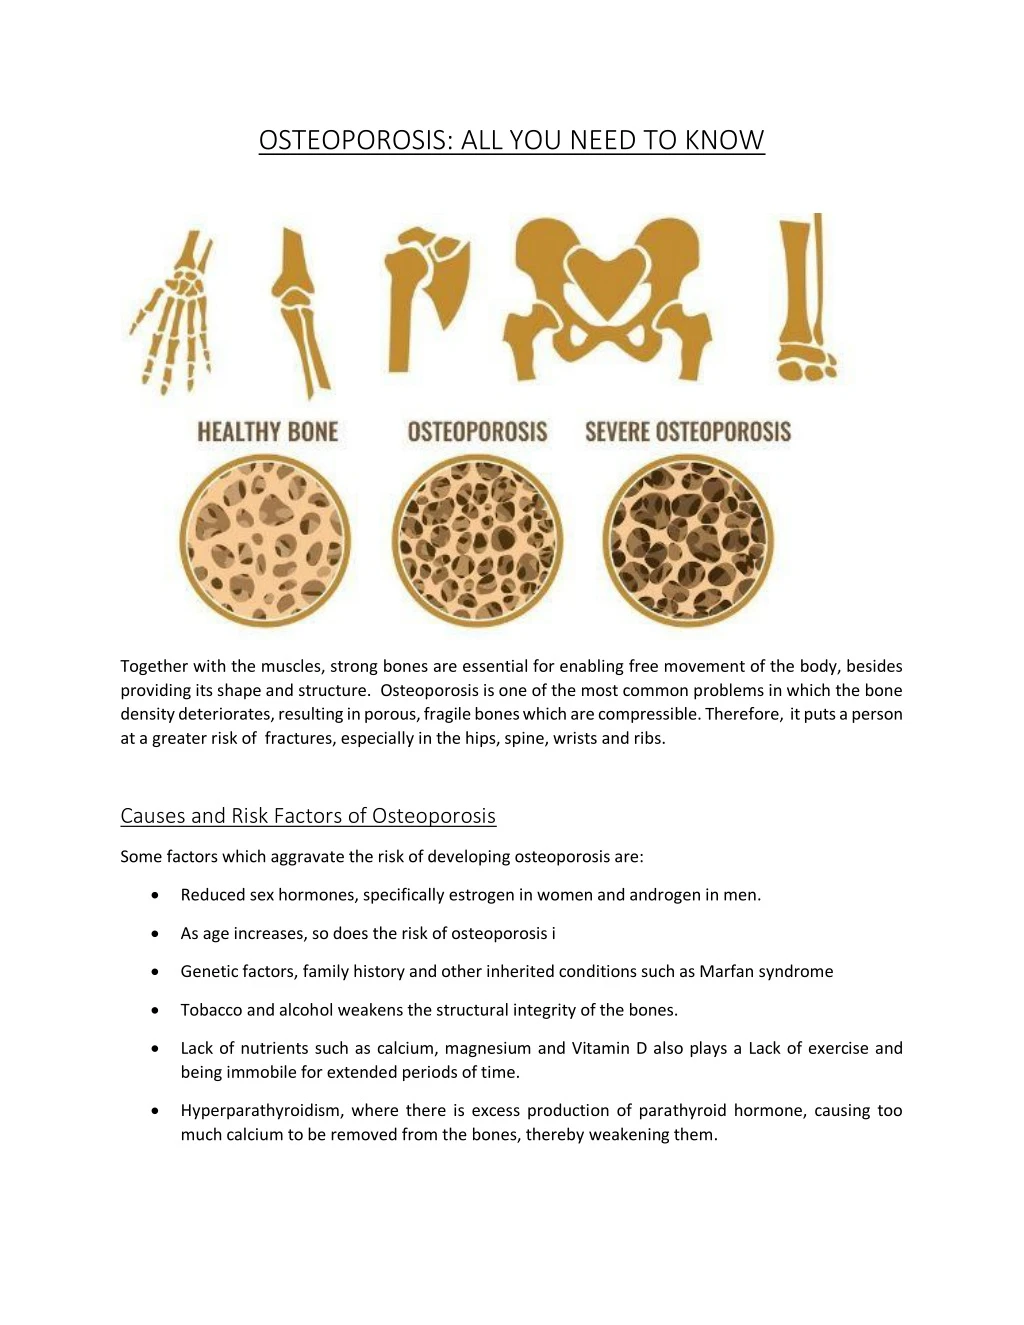 osteoporosis all you need to know